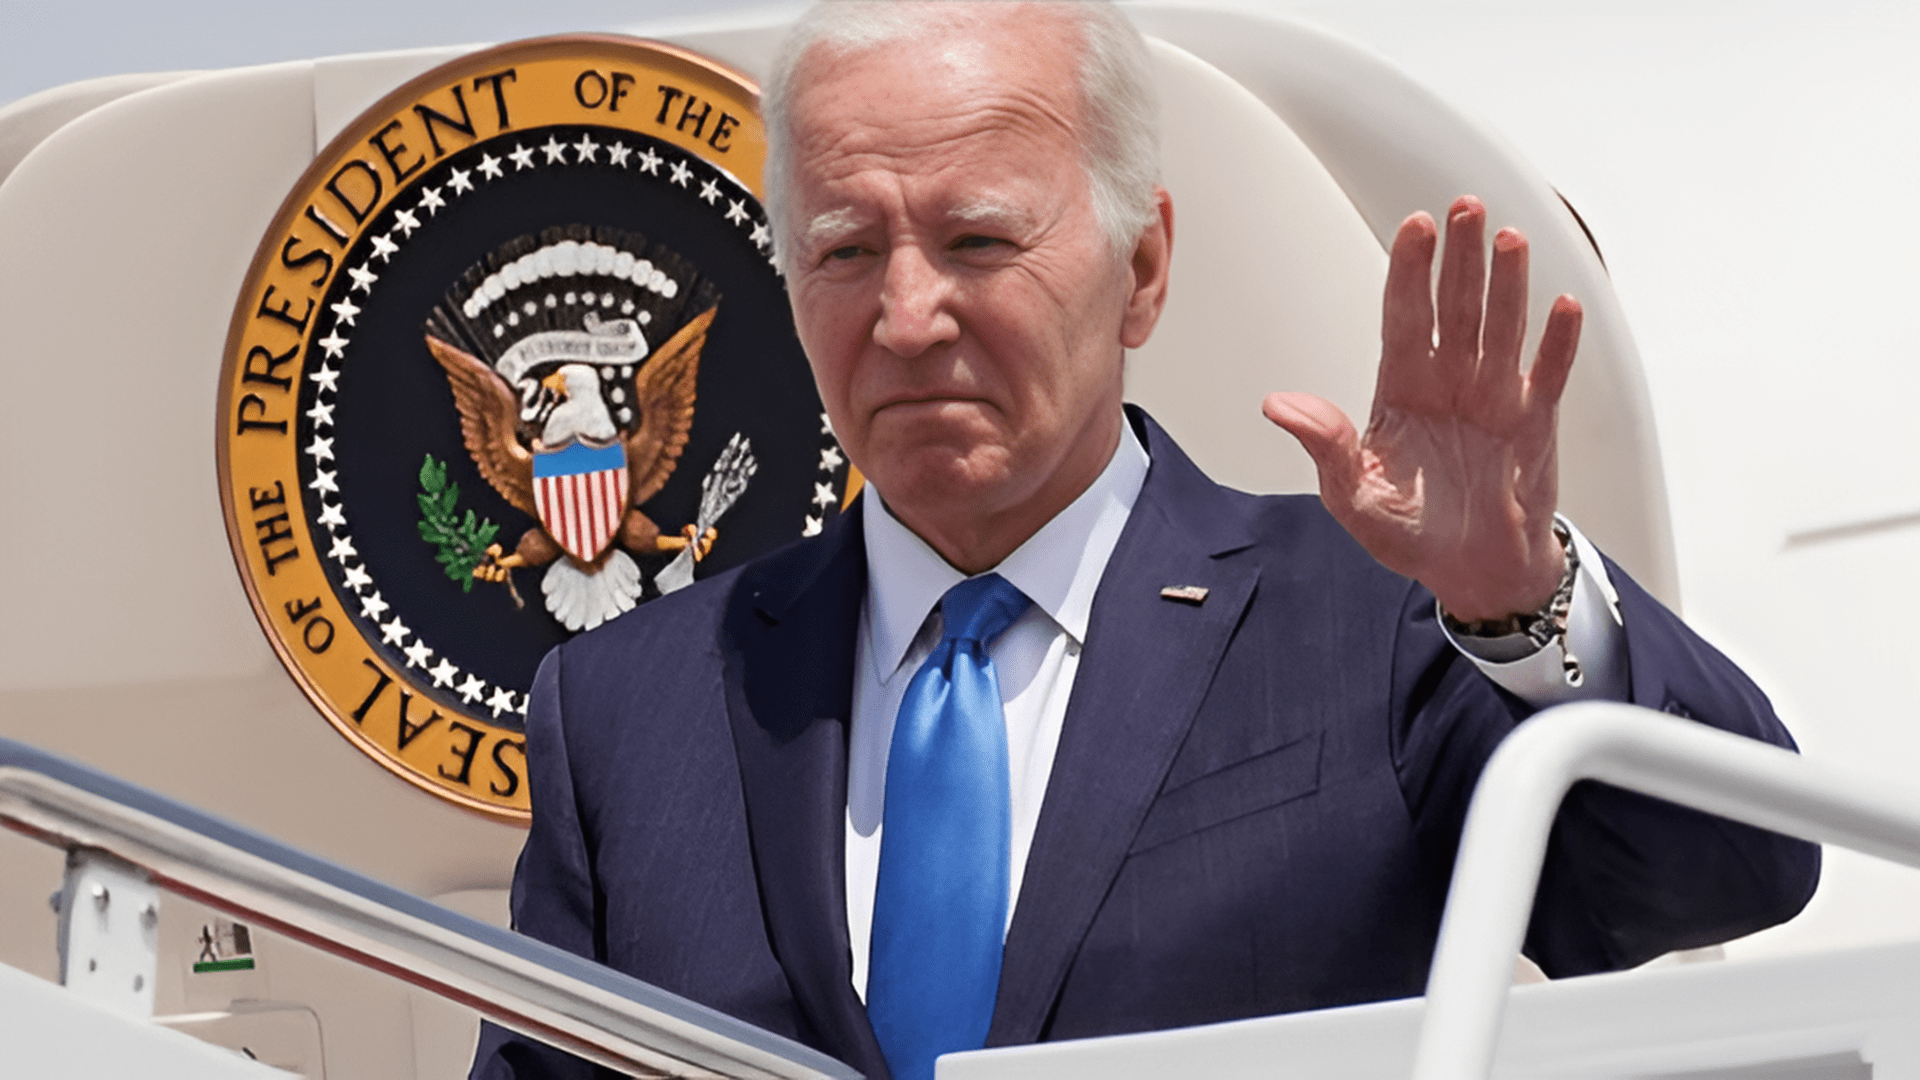 Biden Makes First Public Appearance After Announcing Exit From 2024 Race: Watch